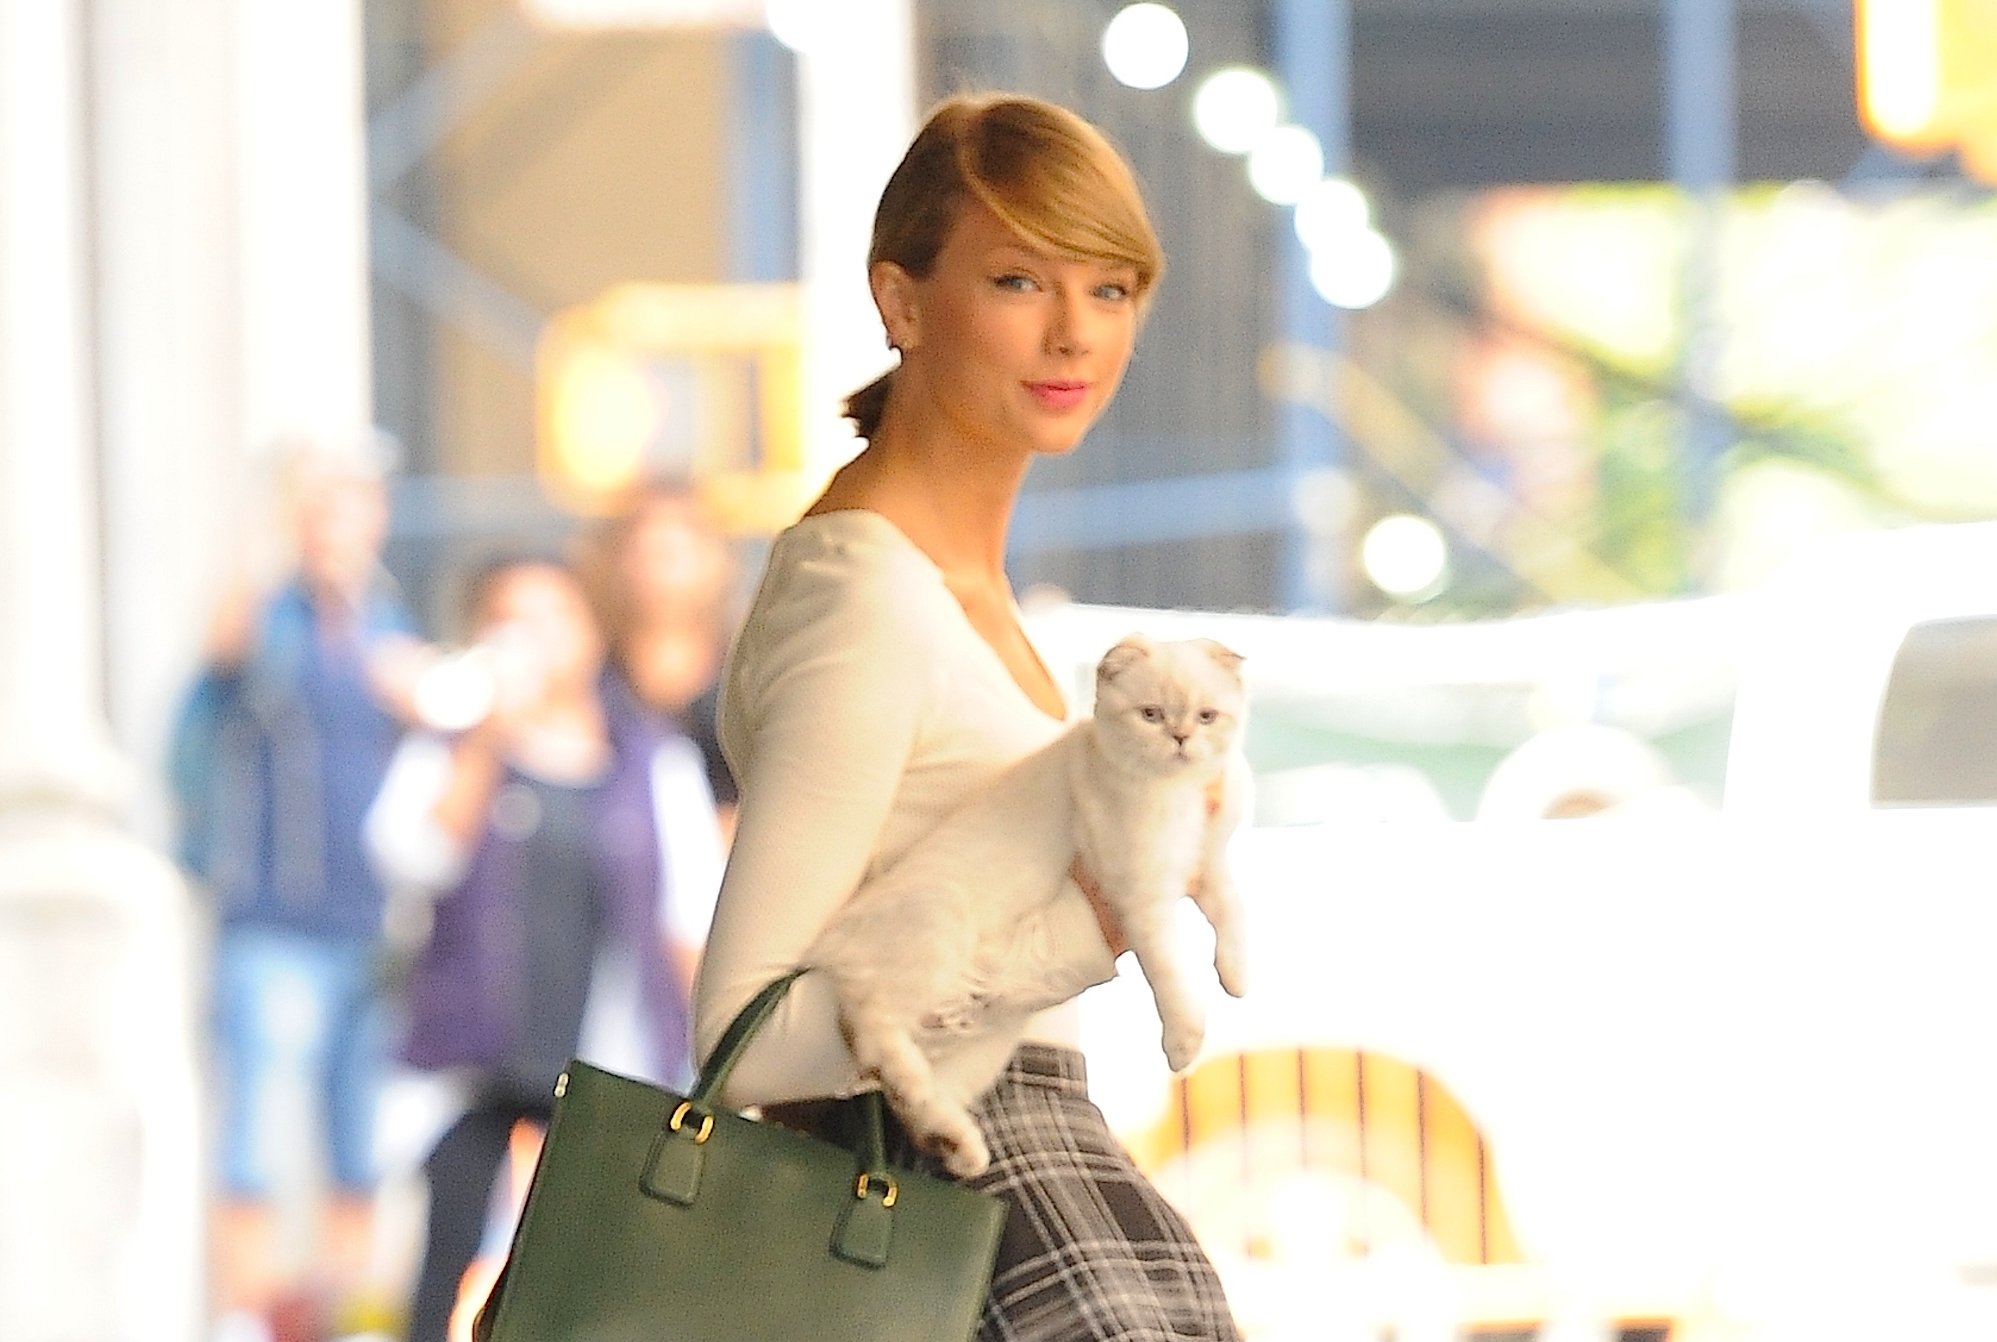 Taylor Swift walking in New York City with her cat, Olivia Benson, in 2014